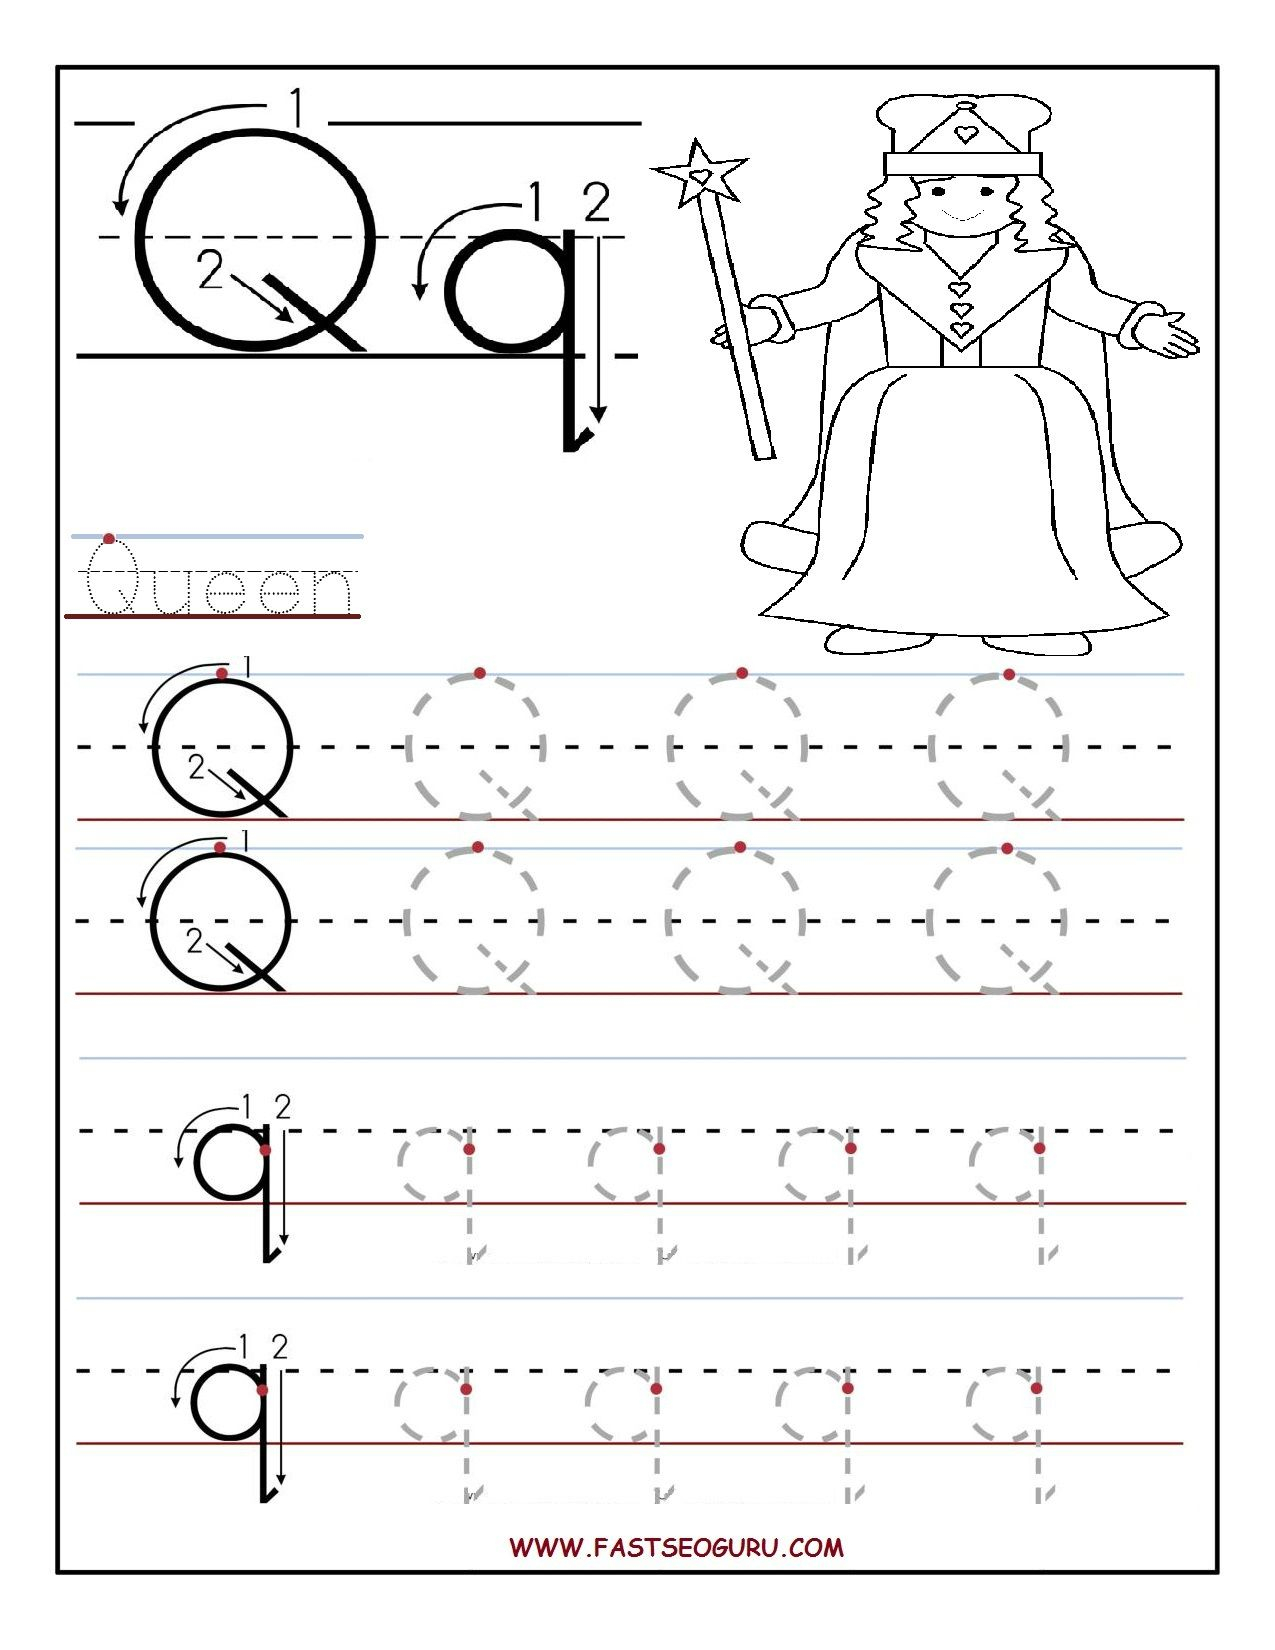 Printable Letter Q Tracing Worksheets For Preschool throughout Letter U Tracing Paper